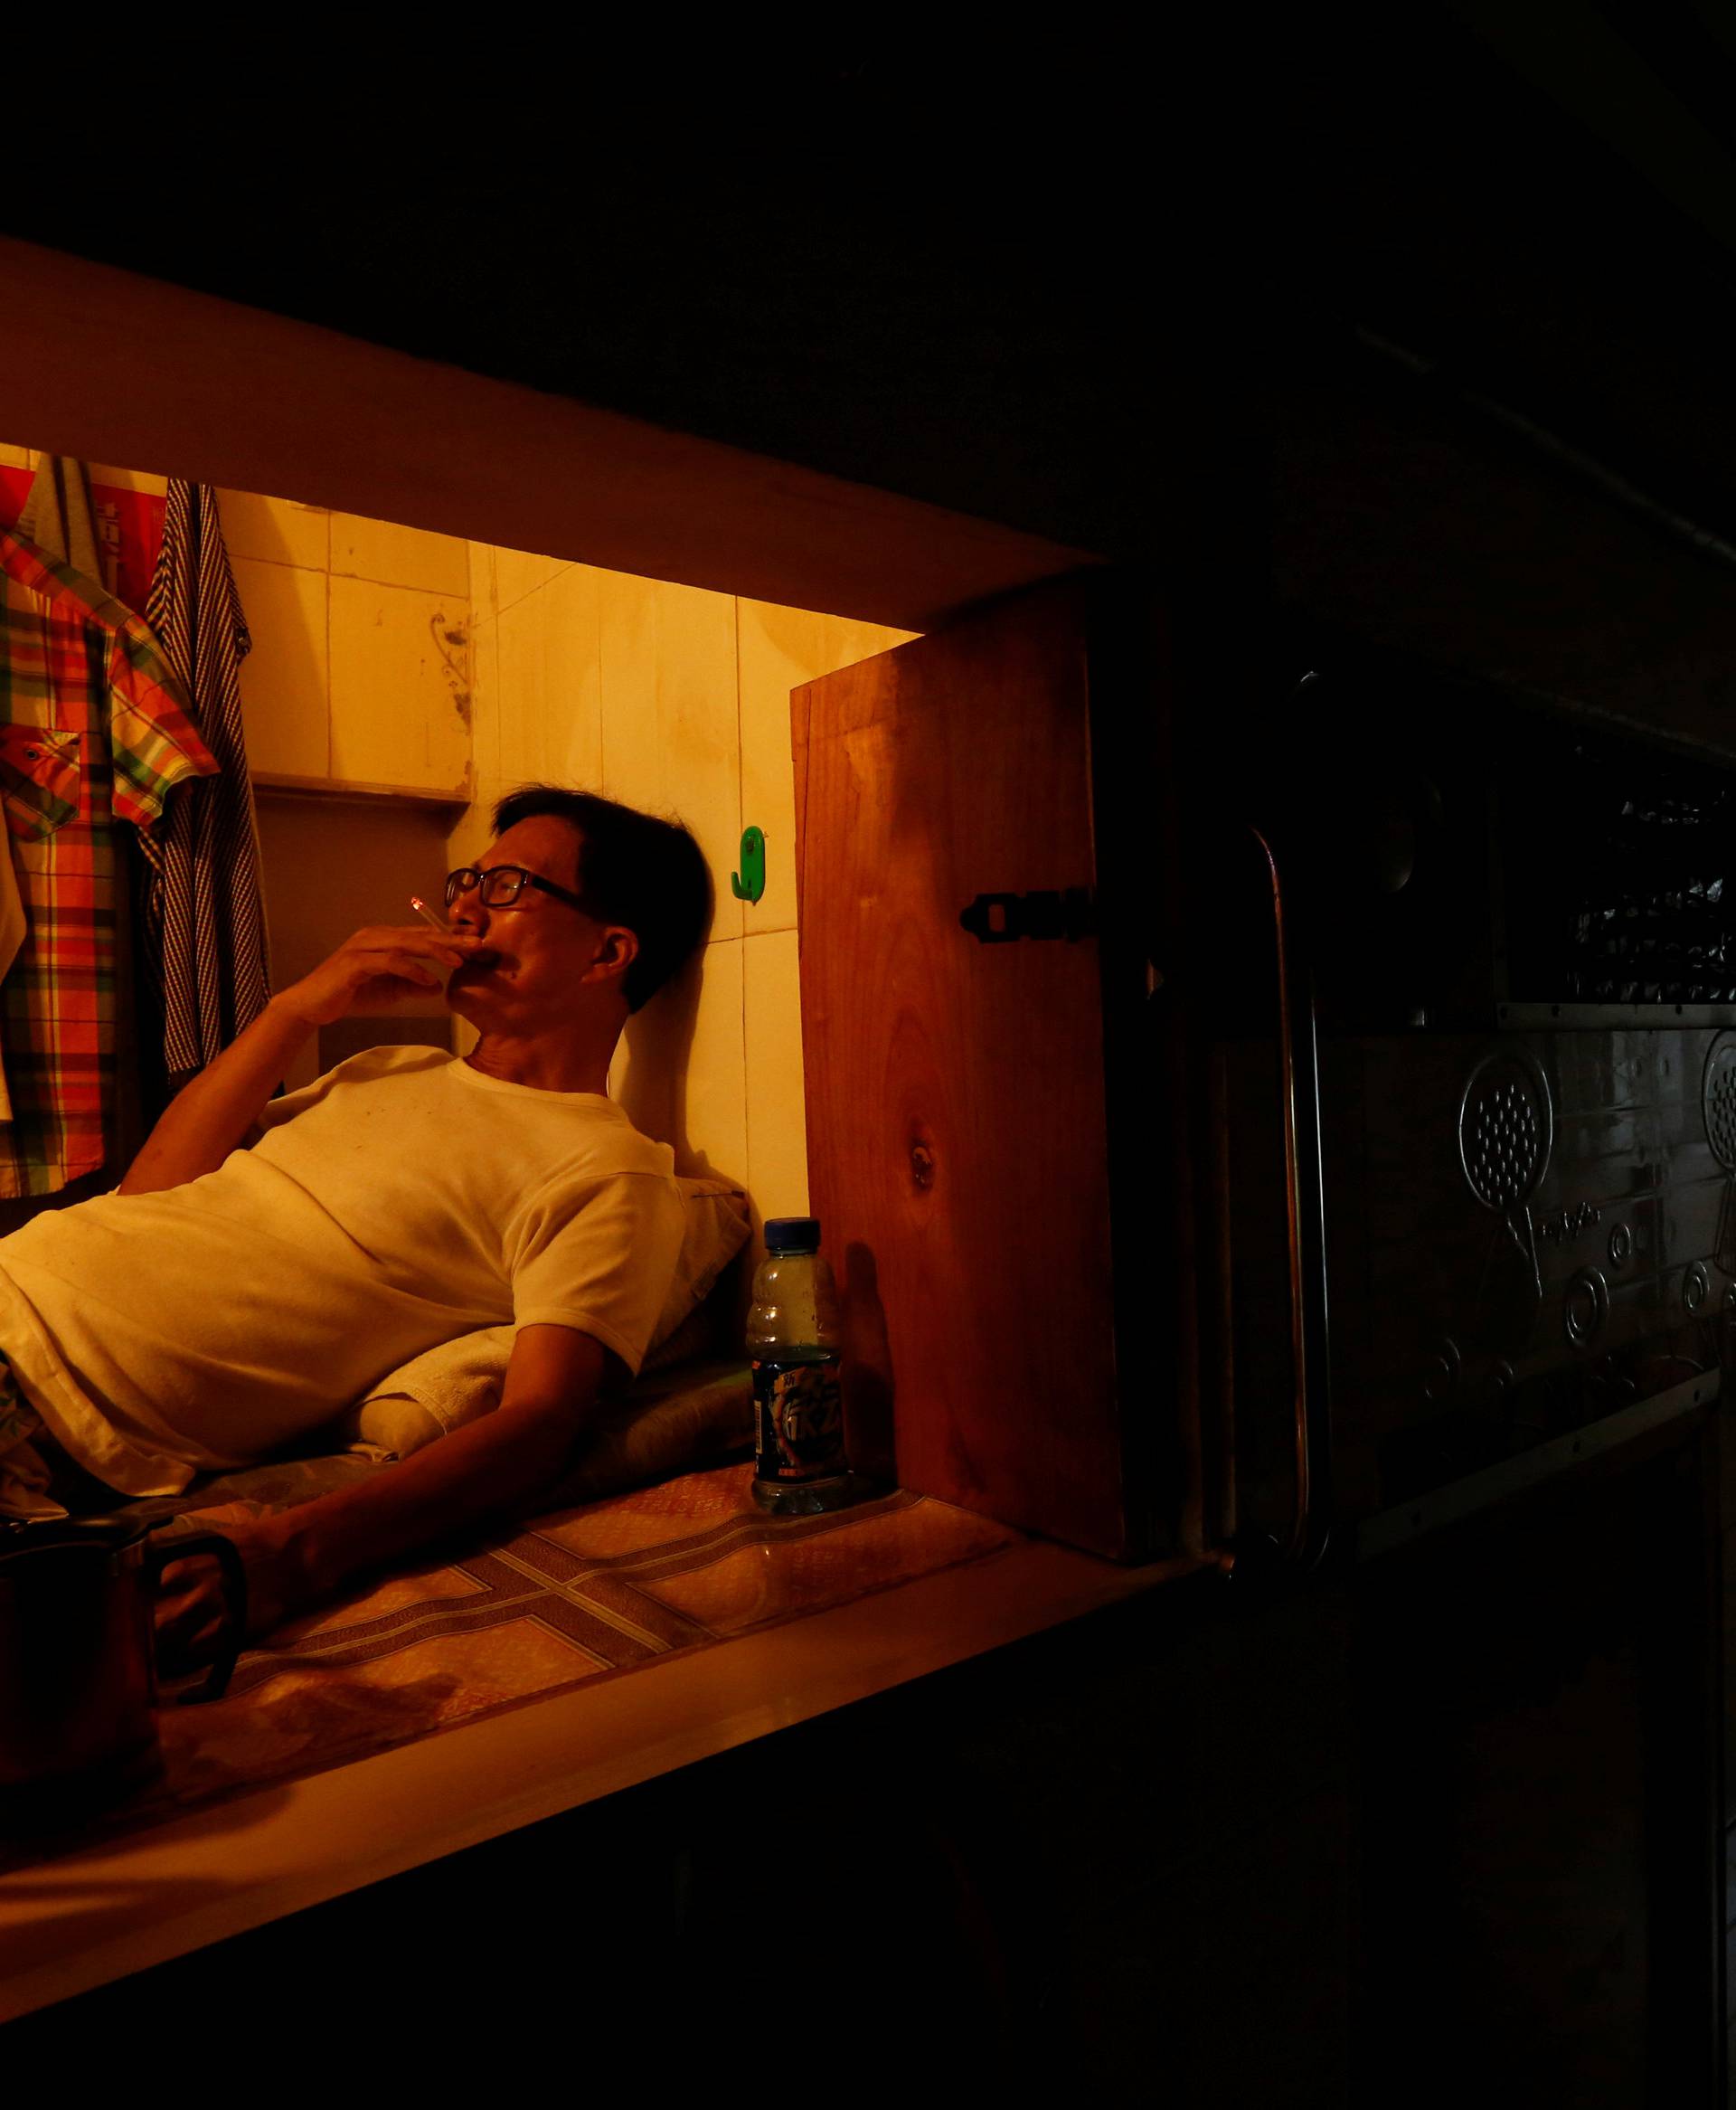 Unemployed Hong Kong resident Simon Wong, 61, smokes inside his 4-by-6-feet partitioned unit, or "coffin unit", with a monthly rent of HK$1,750 ($226) in Hong Kong